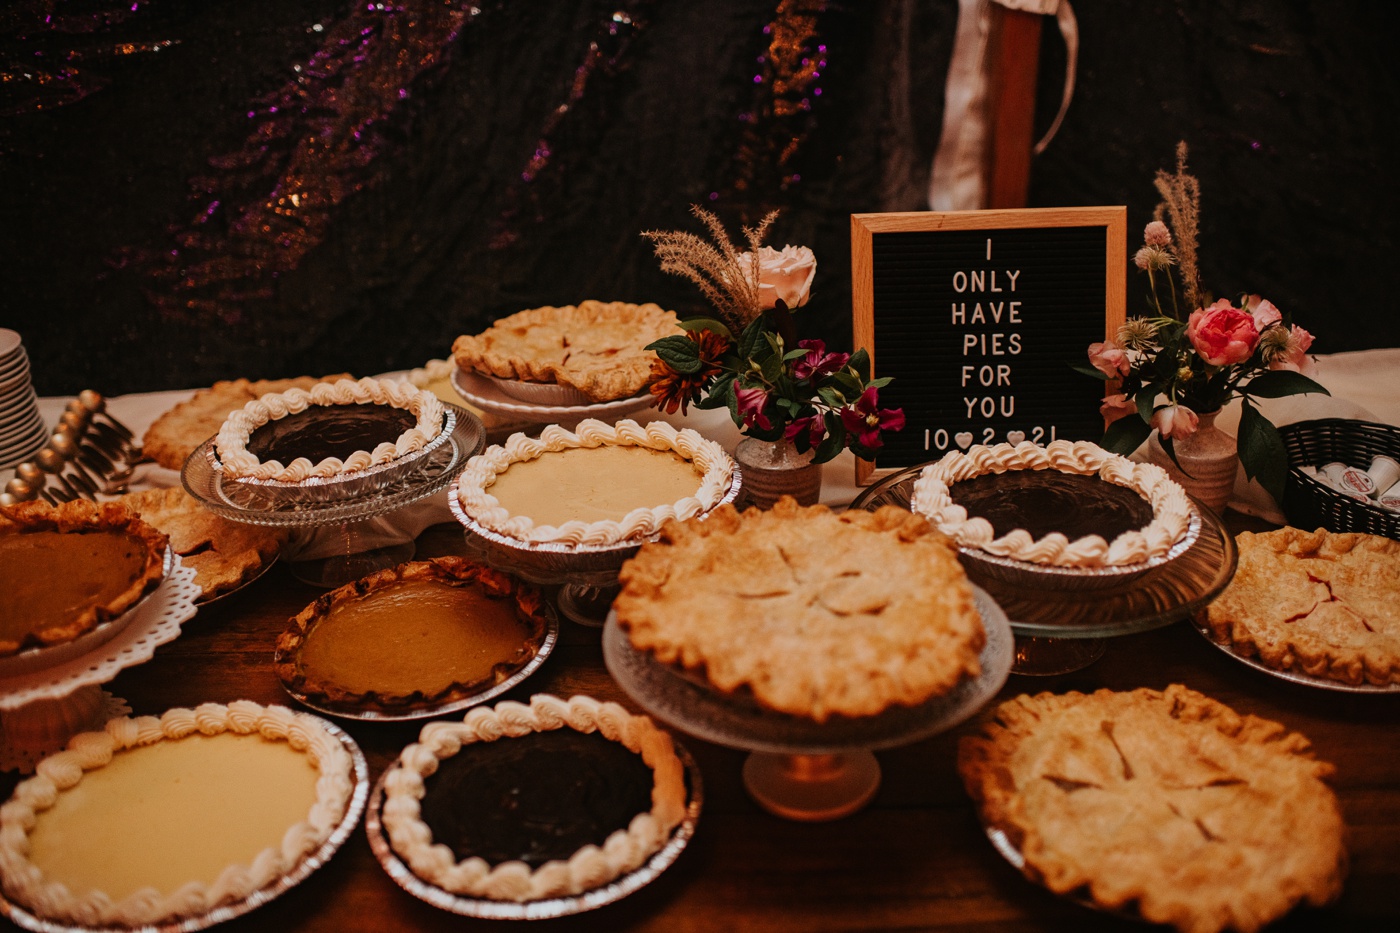 Pie table at a wedding instead of cake